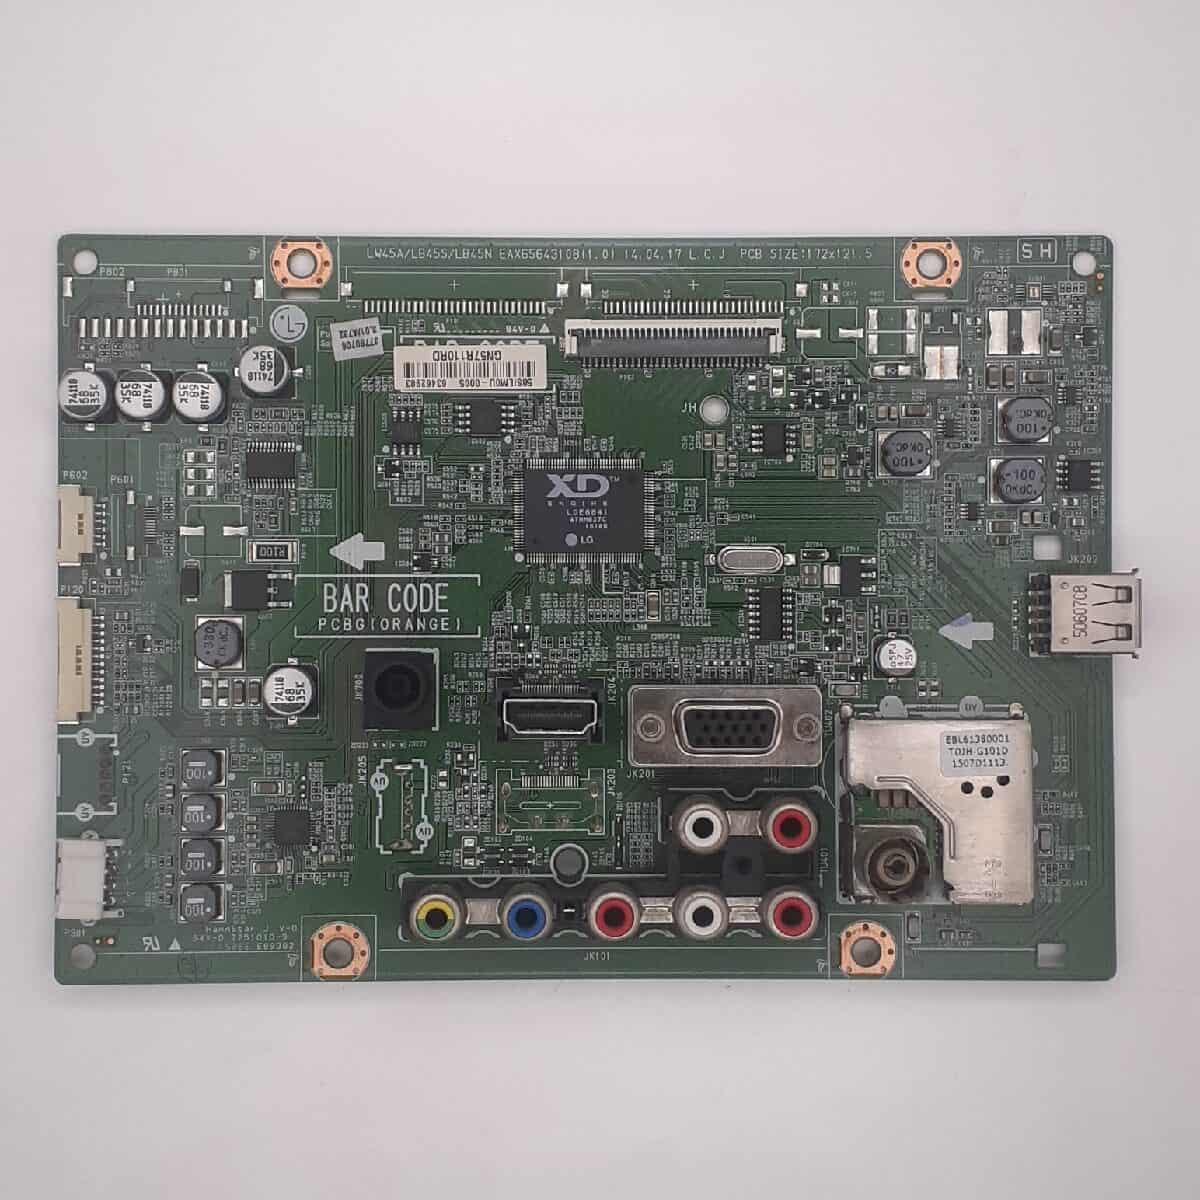 22LF460A LG MOTHERBOARD FOR LED TV